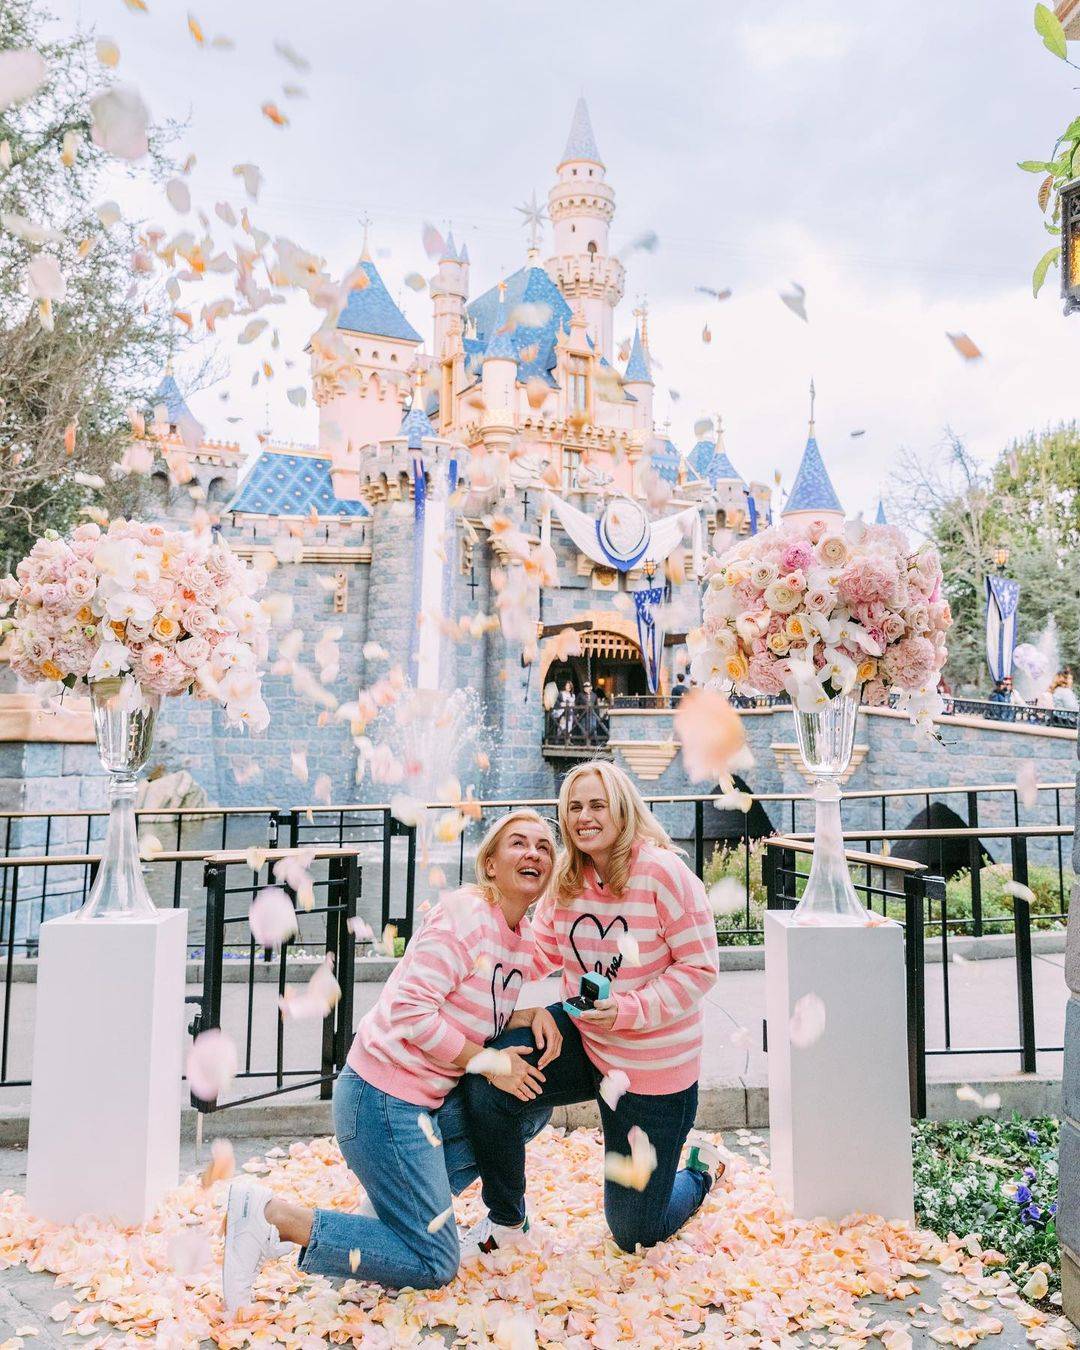 Photo by Rebel Wilson on February 19, 2023. An image of 2 people holding hands with a sparkling engagement ring on display at Disney World Resort